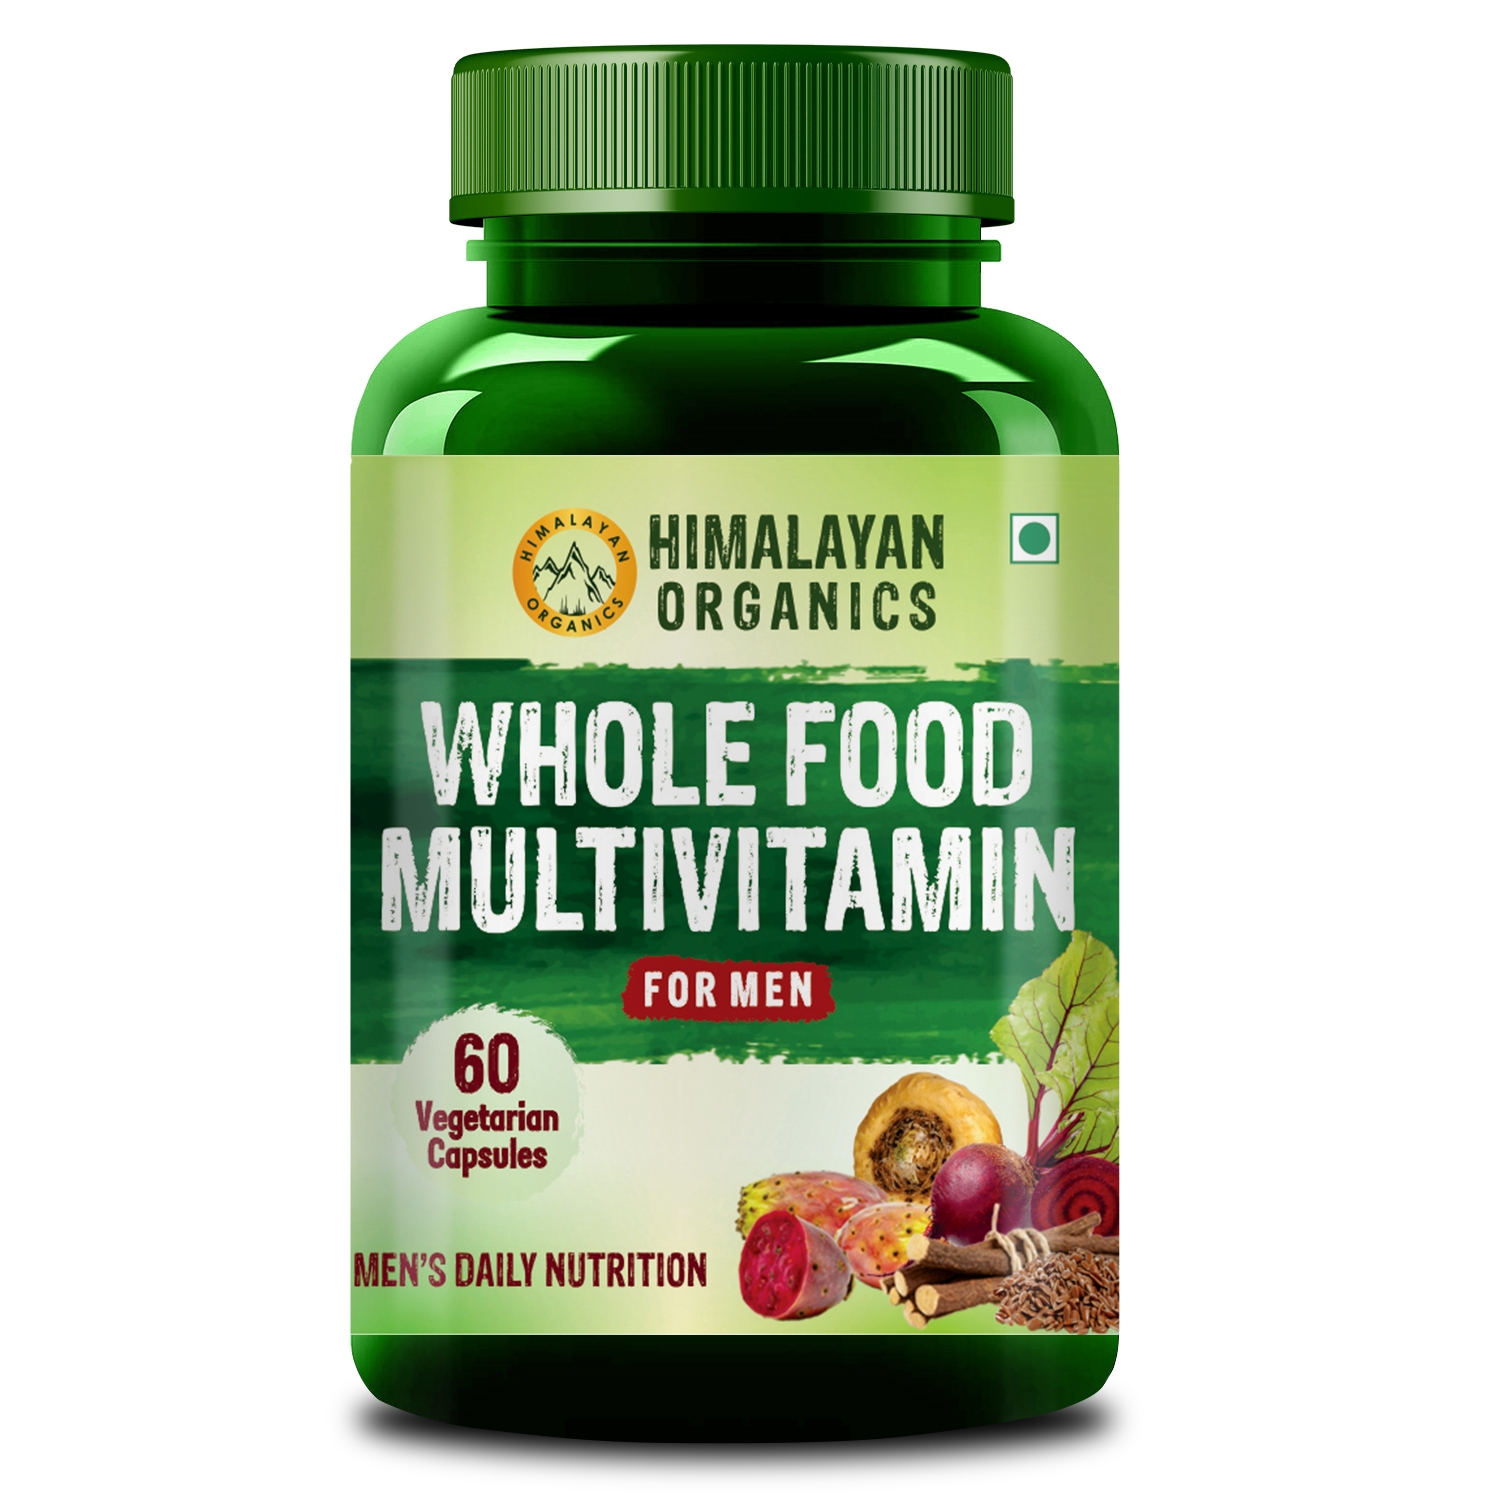 Himalayan Organics | Himalayan Organics Whole Food Multivitamin for Men || With Natural Vitamins, Minerals, Extracts || Best for Energy, Brain, Heart Health & Eye Health || 60 Veg Capsules